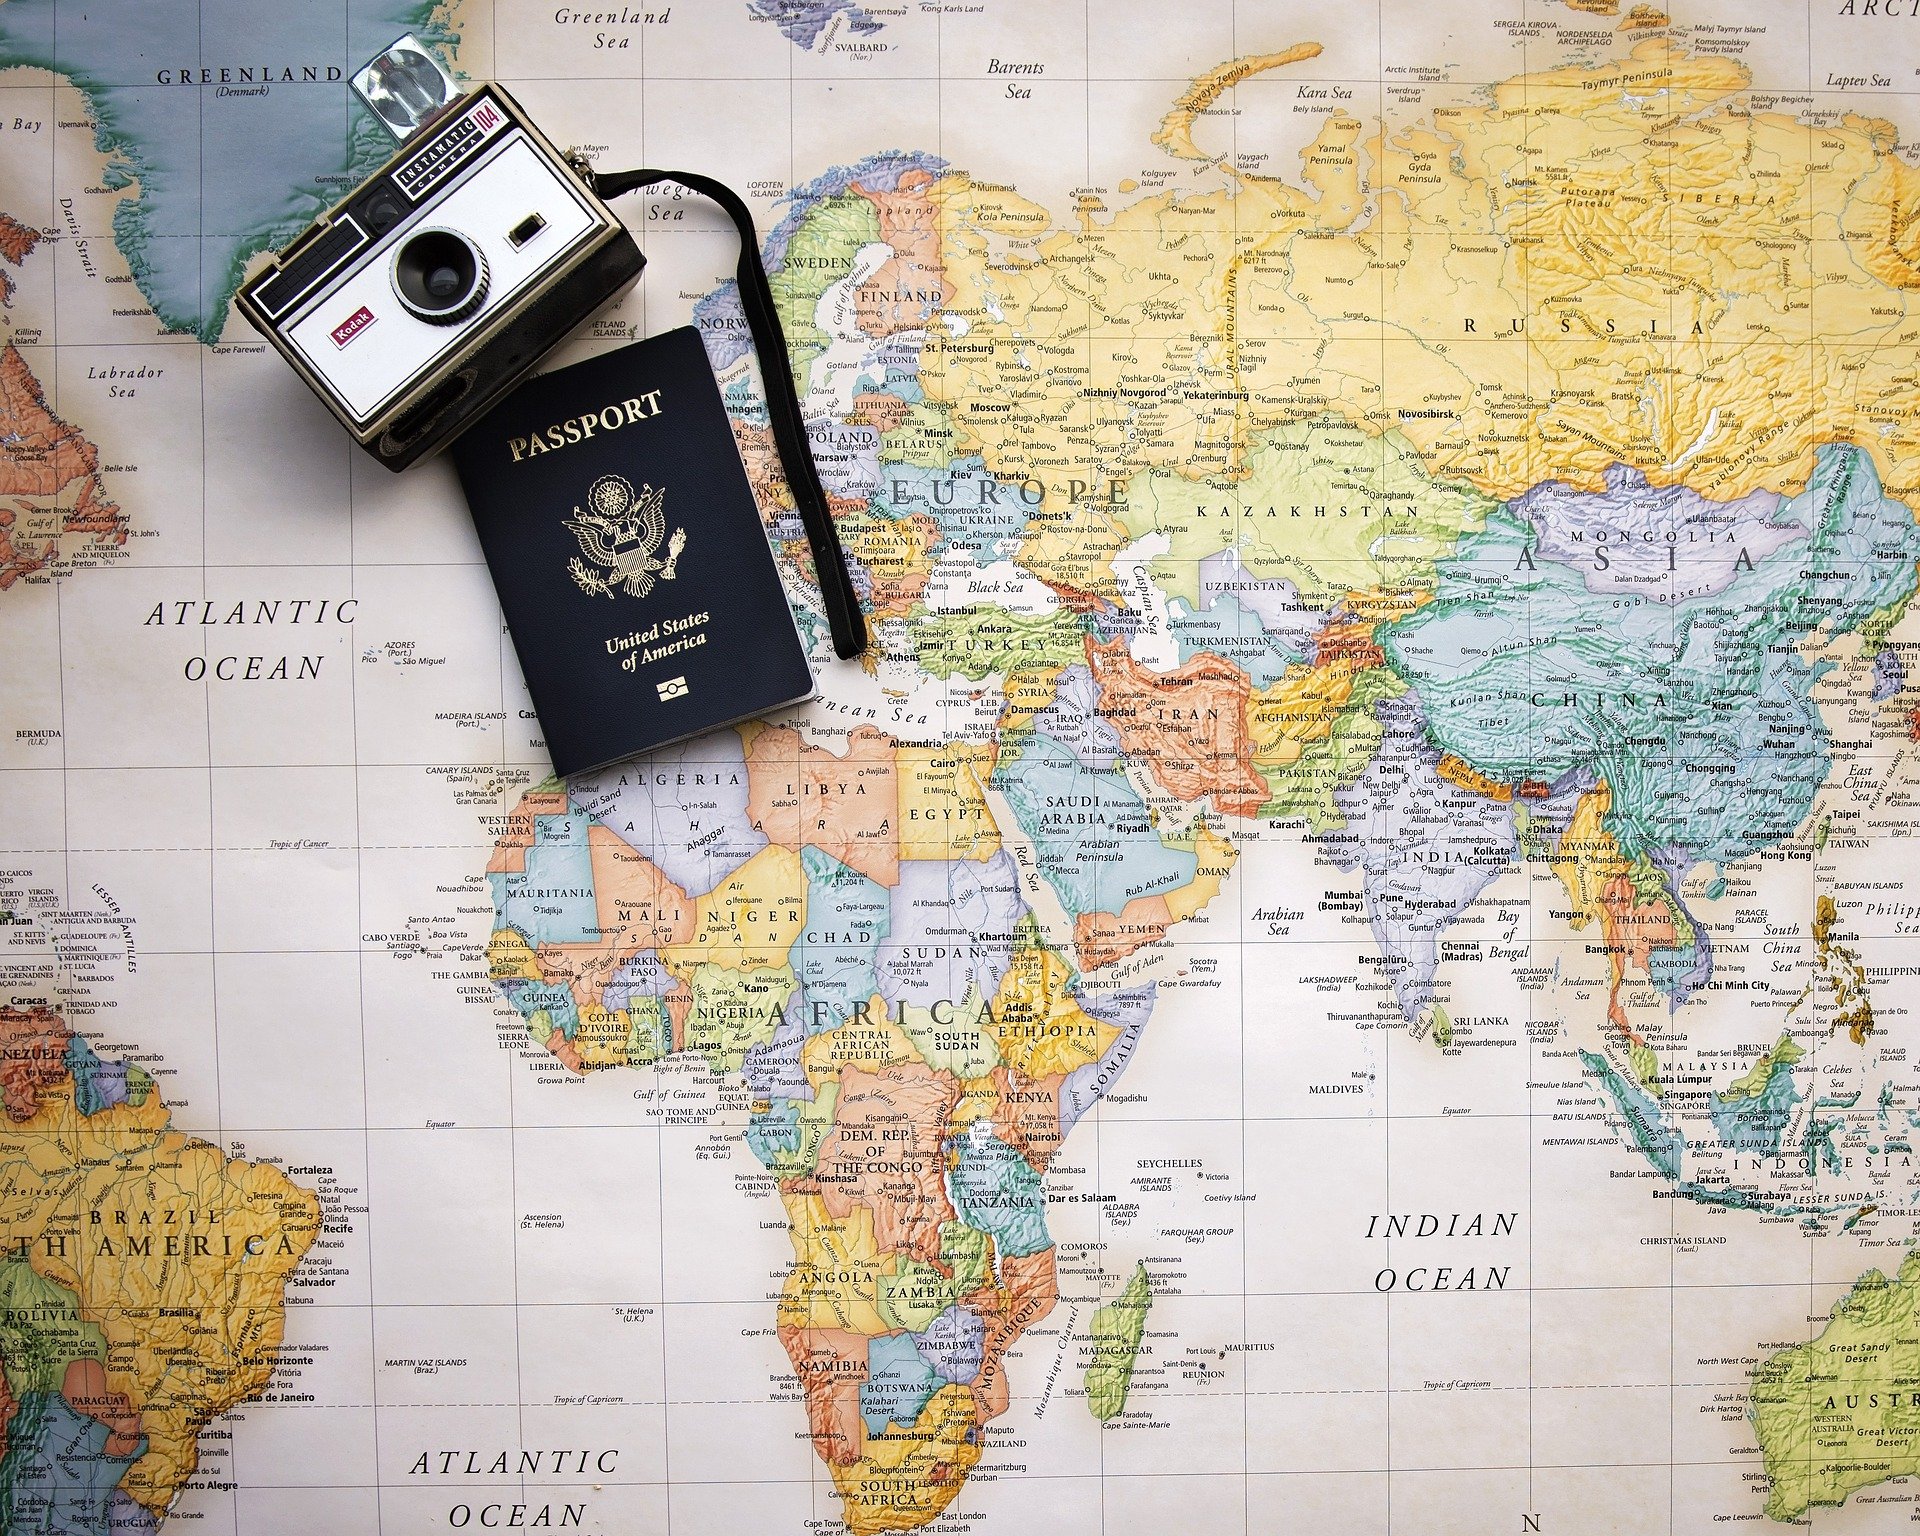 What countries require travel insurance for entry